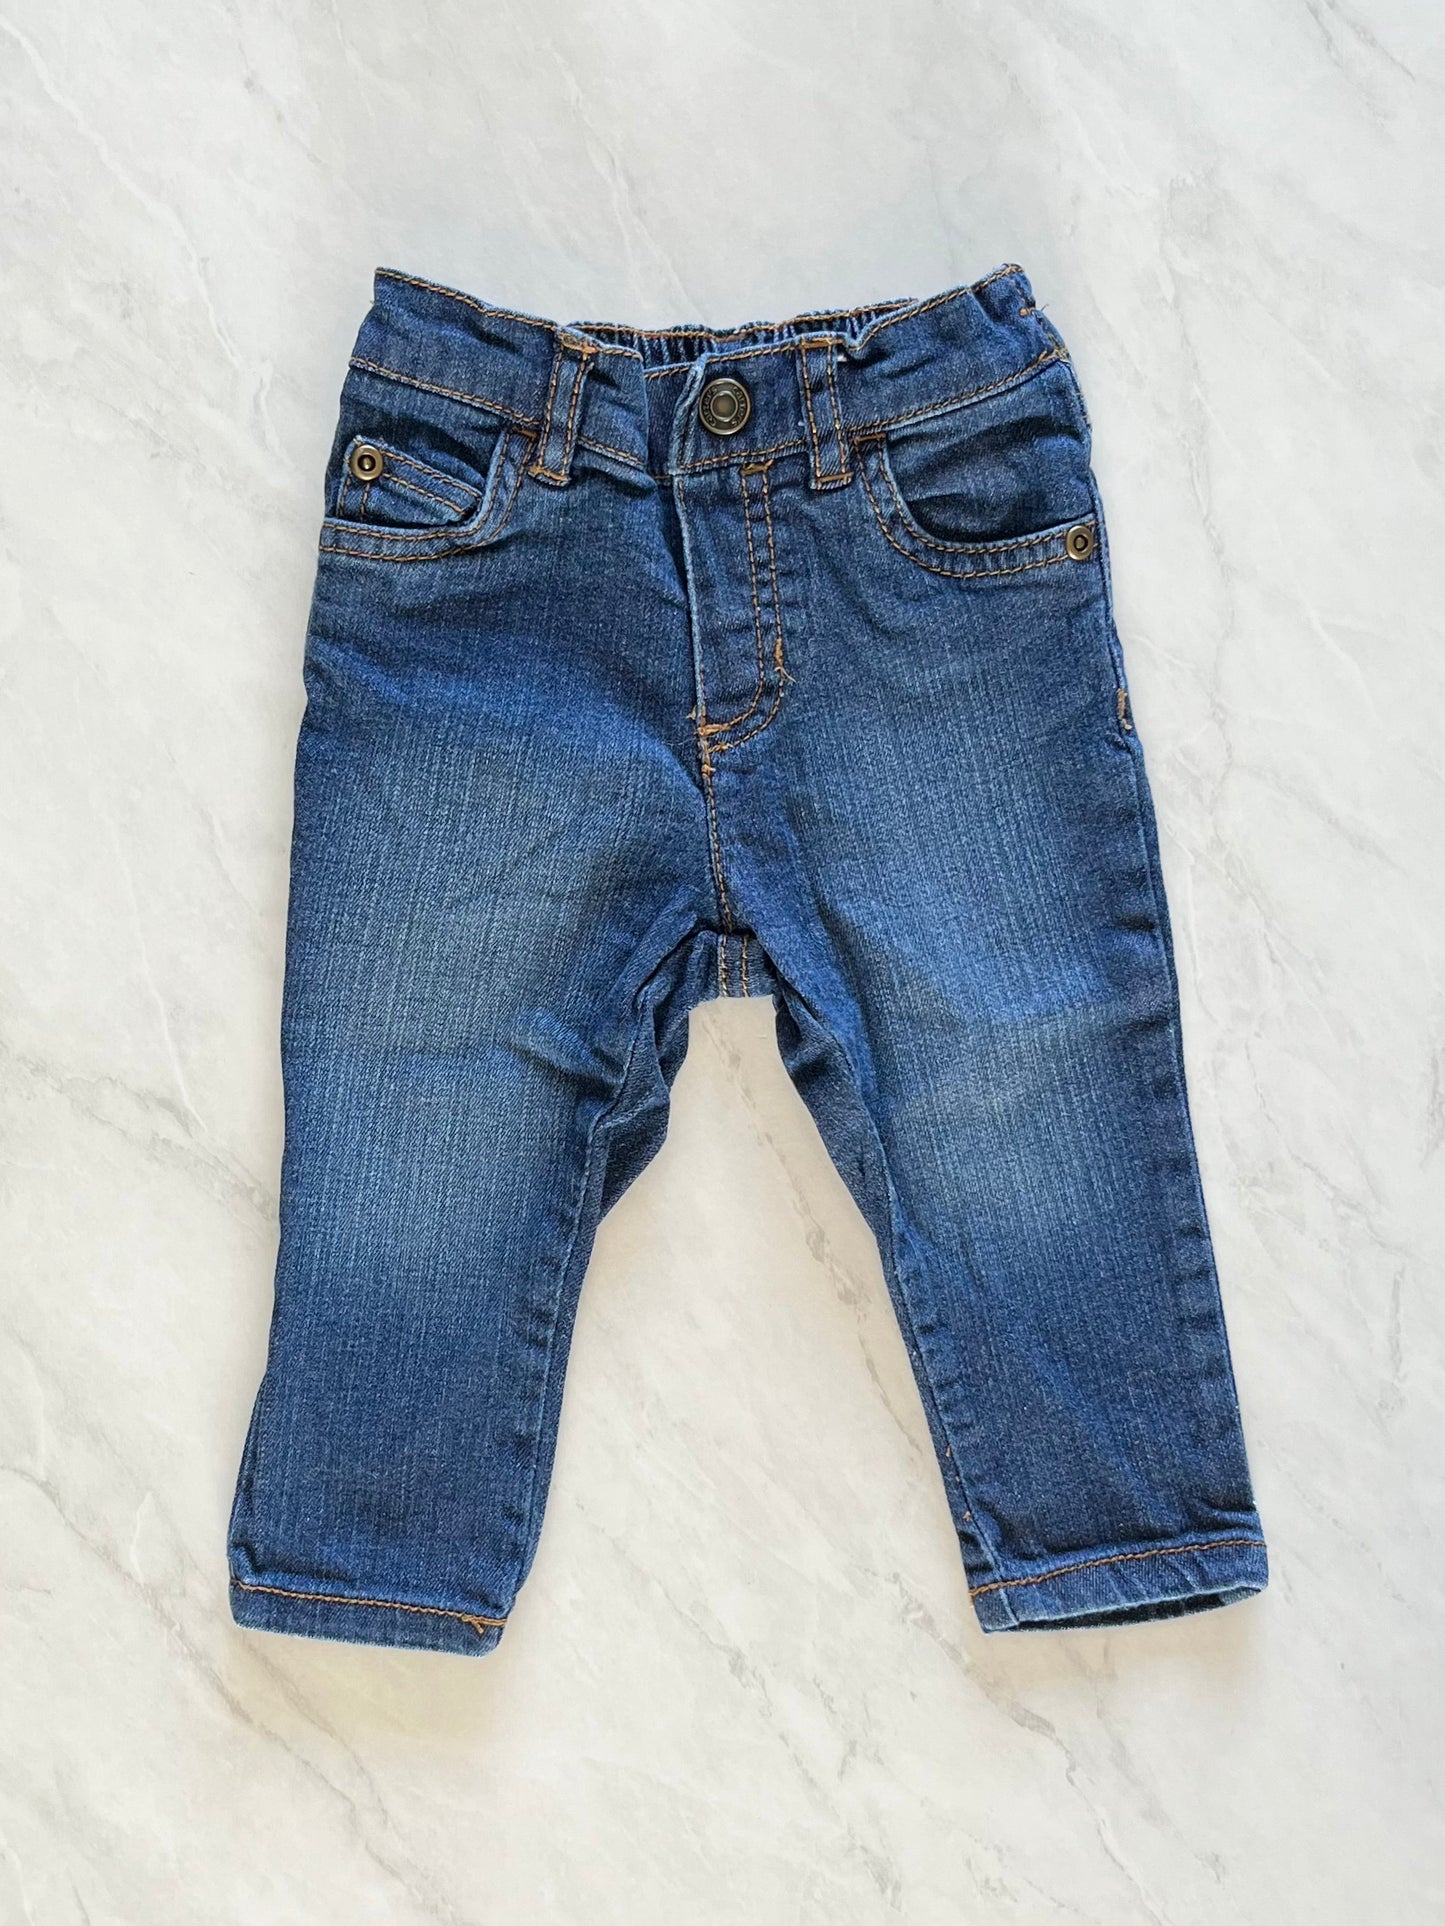 Jeans - Carters - 12 mois